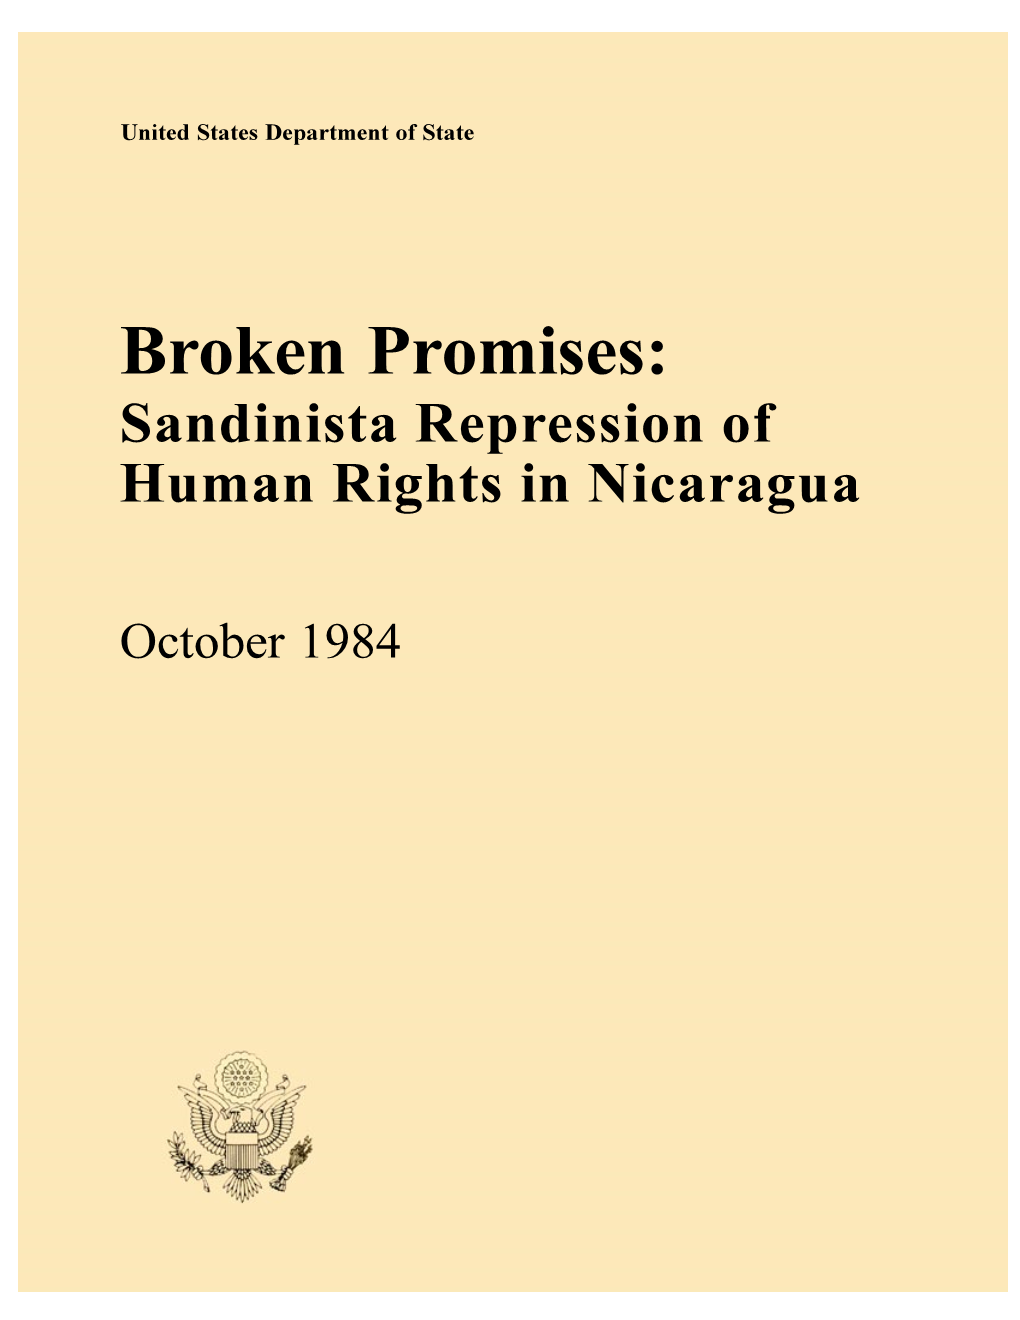 Broken Promises: Sandinista Repression of Human Rights in Nicaragua